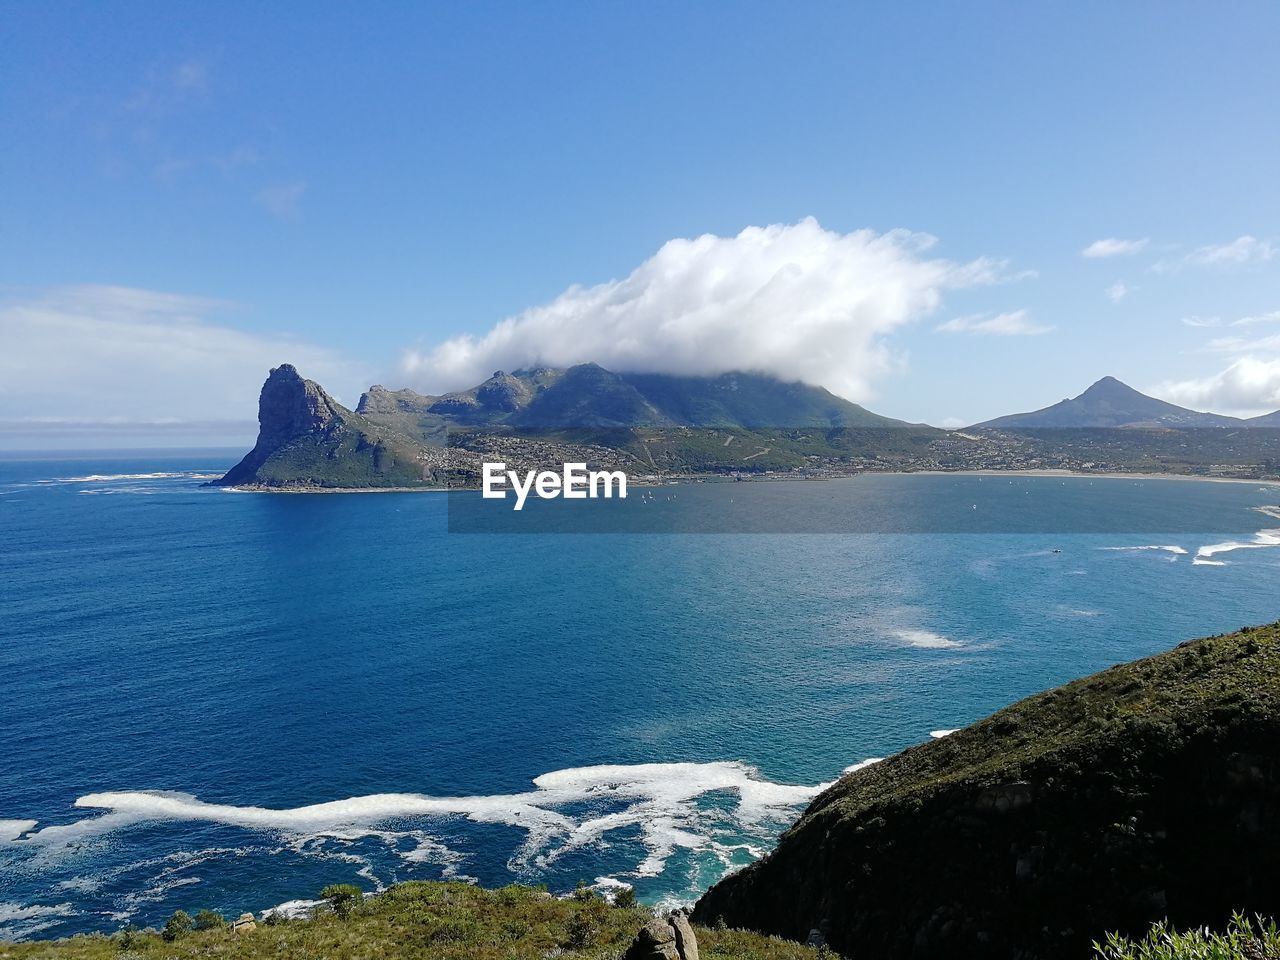 The sentinel, hout bay, cape town, south africa